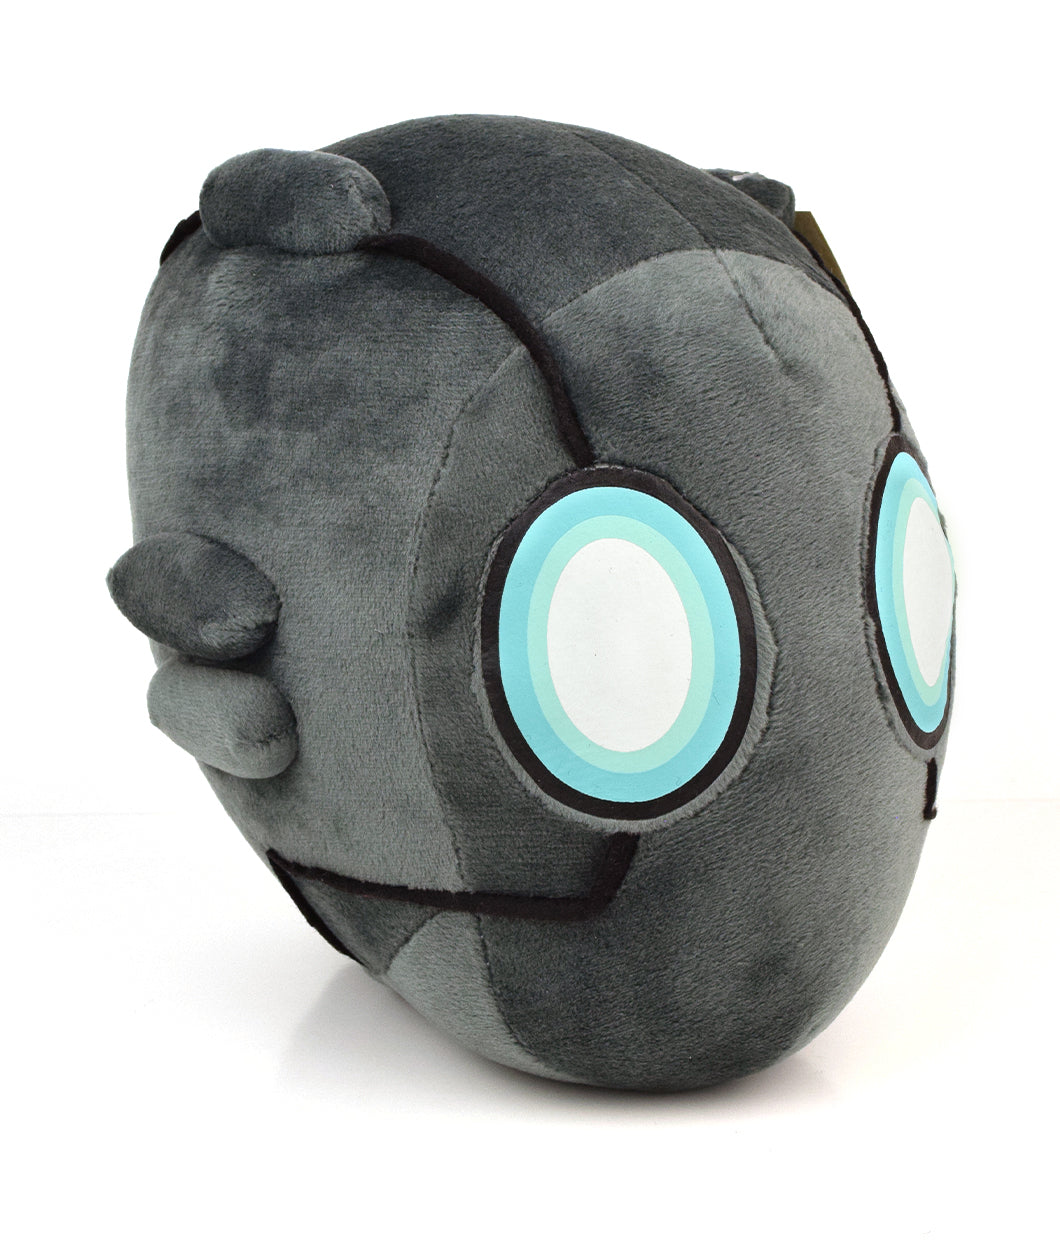 Gray robot head plushie. Shape is ovular in the front and oblong in the back. There are black accent lines and three ovular shapes on the left side of the head. Two eyes are in the front with a blue, light blue, and white fill - from Tesladyne